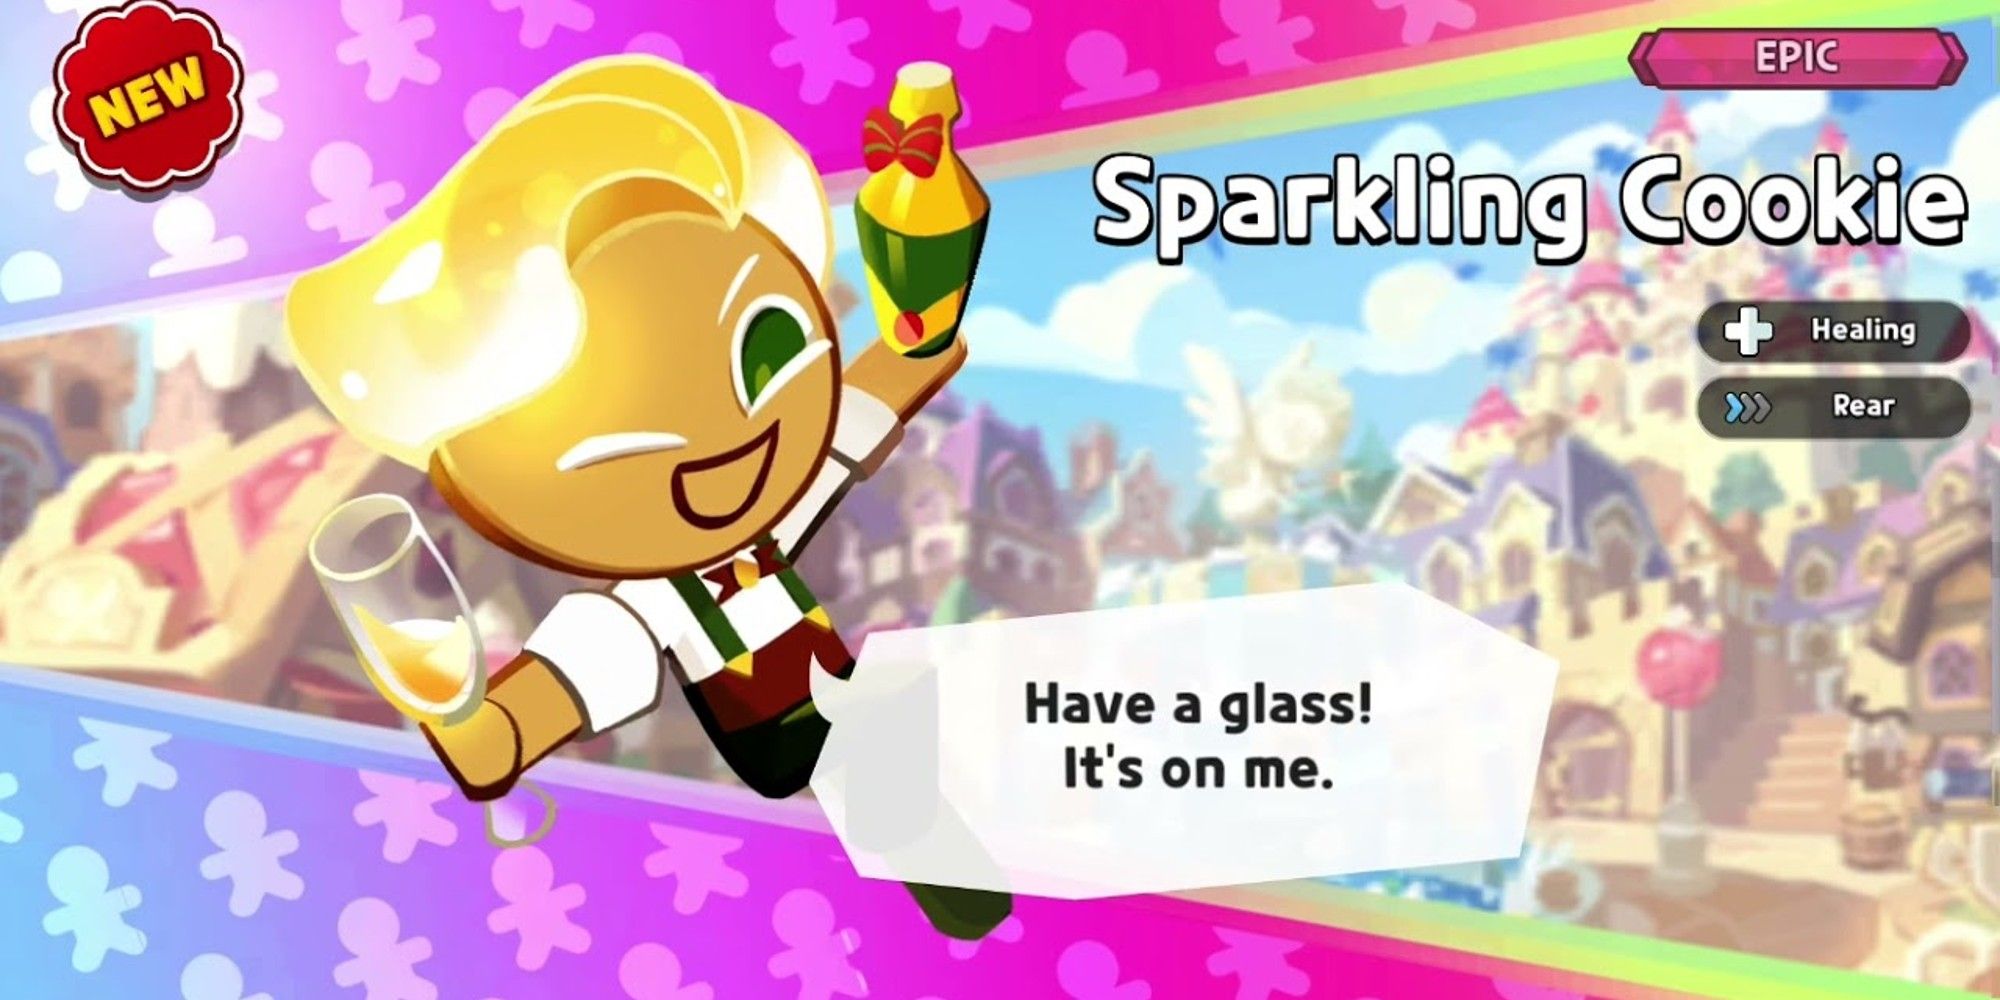 He holds a glass in one hand and a bottle of sparkling juice in the other